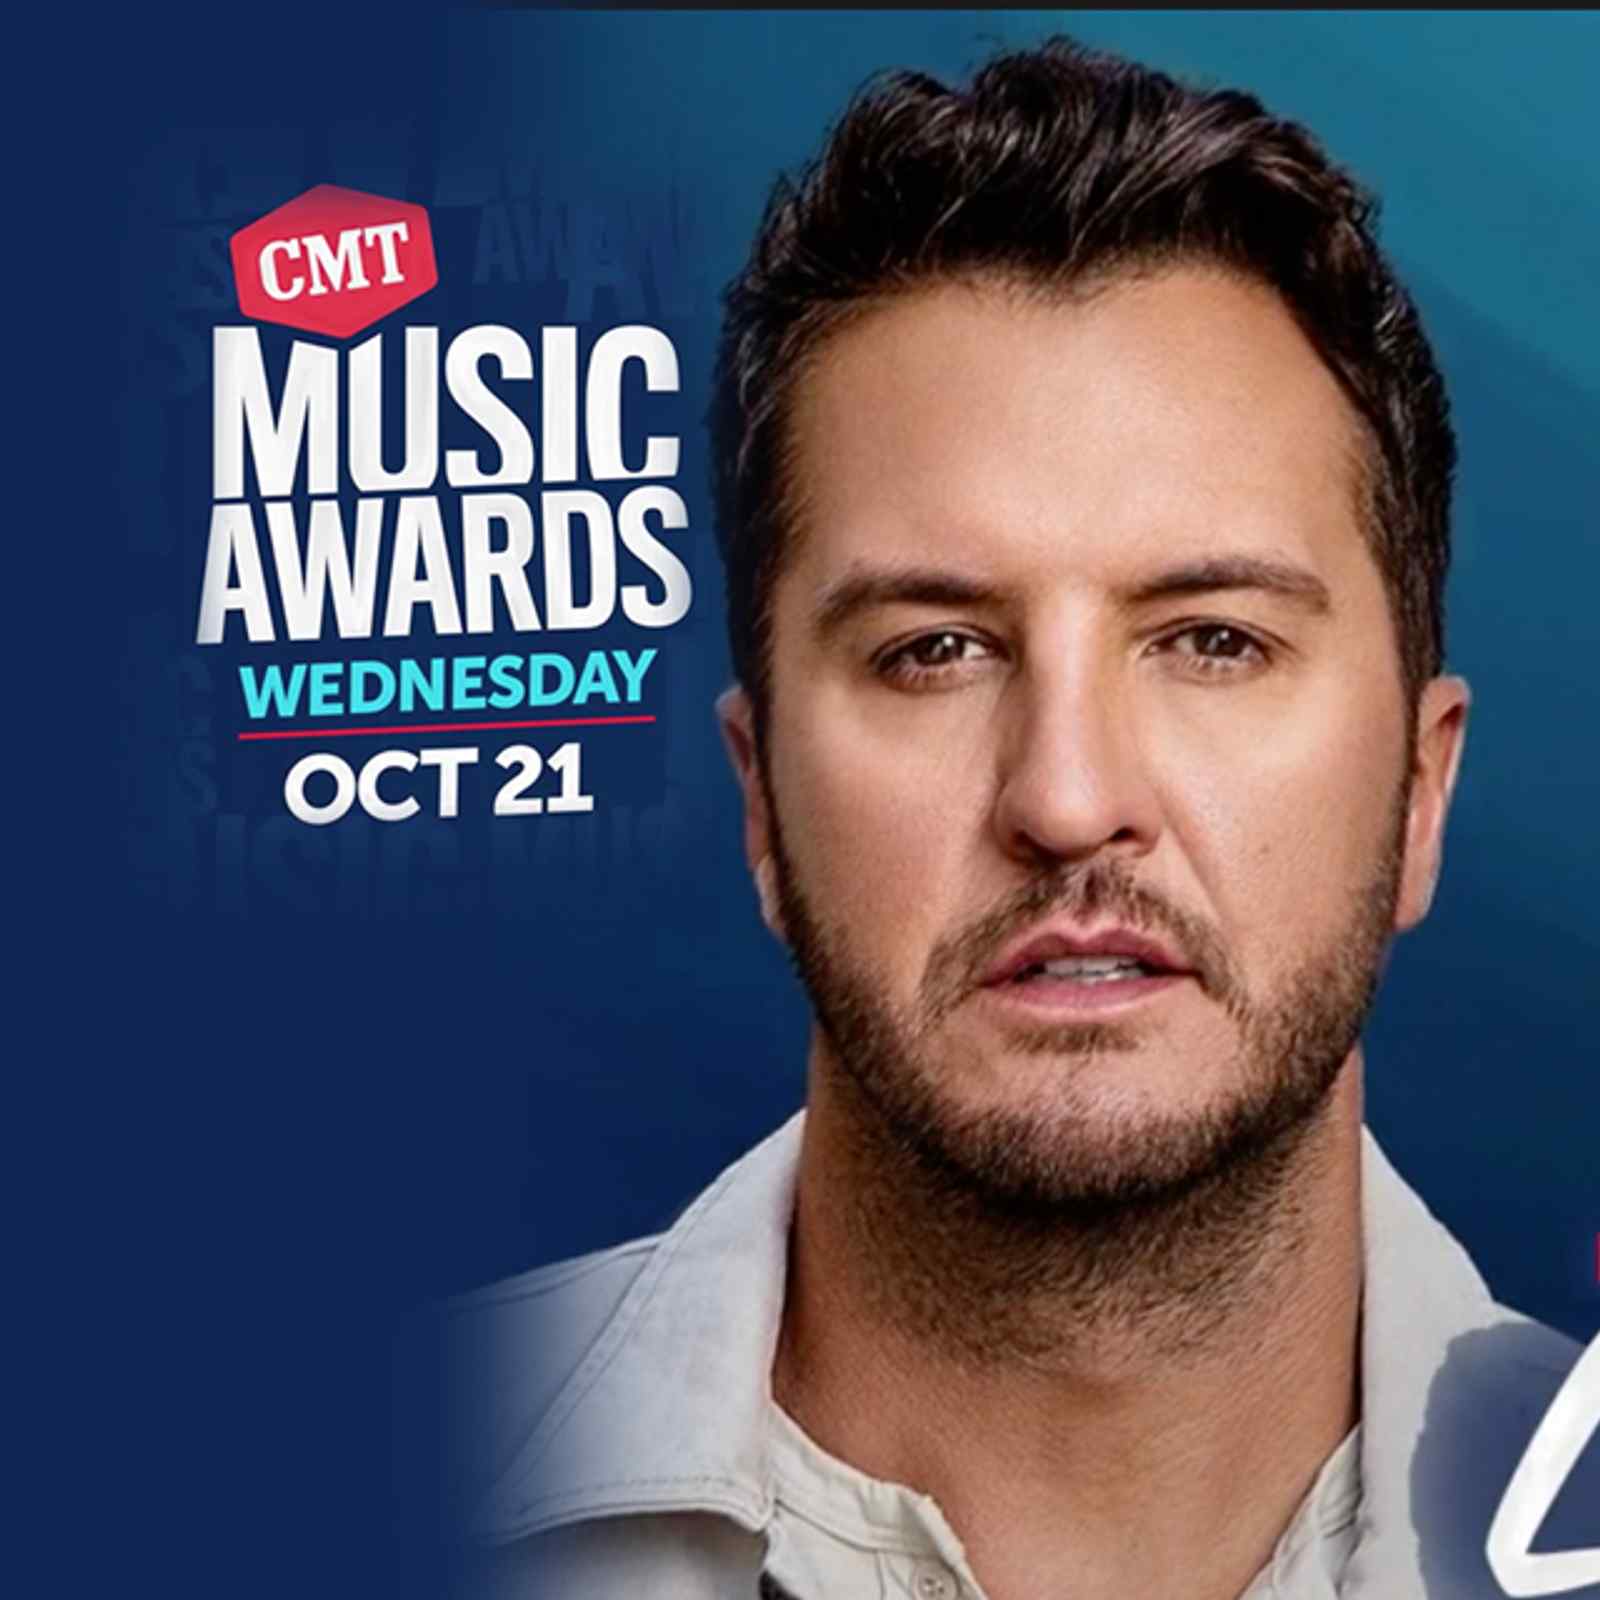 Luke Bryan to perform during “2020 CMT Music Awards” airing Wednesday, October 21st at 8PM ET/7PM CT